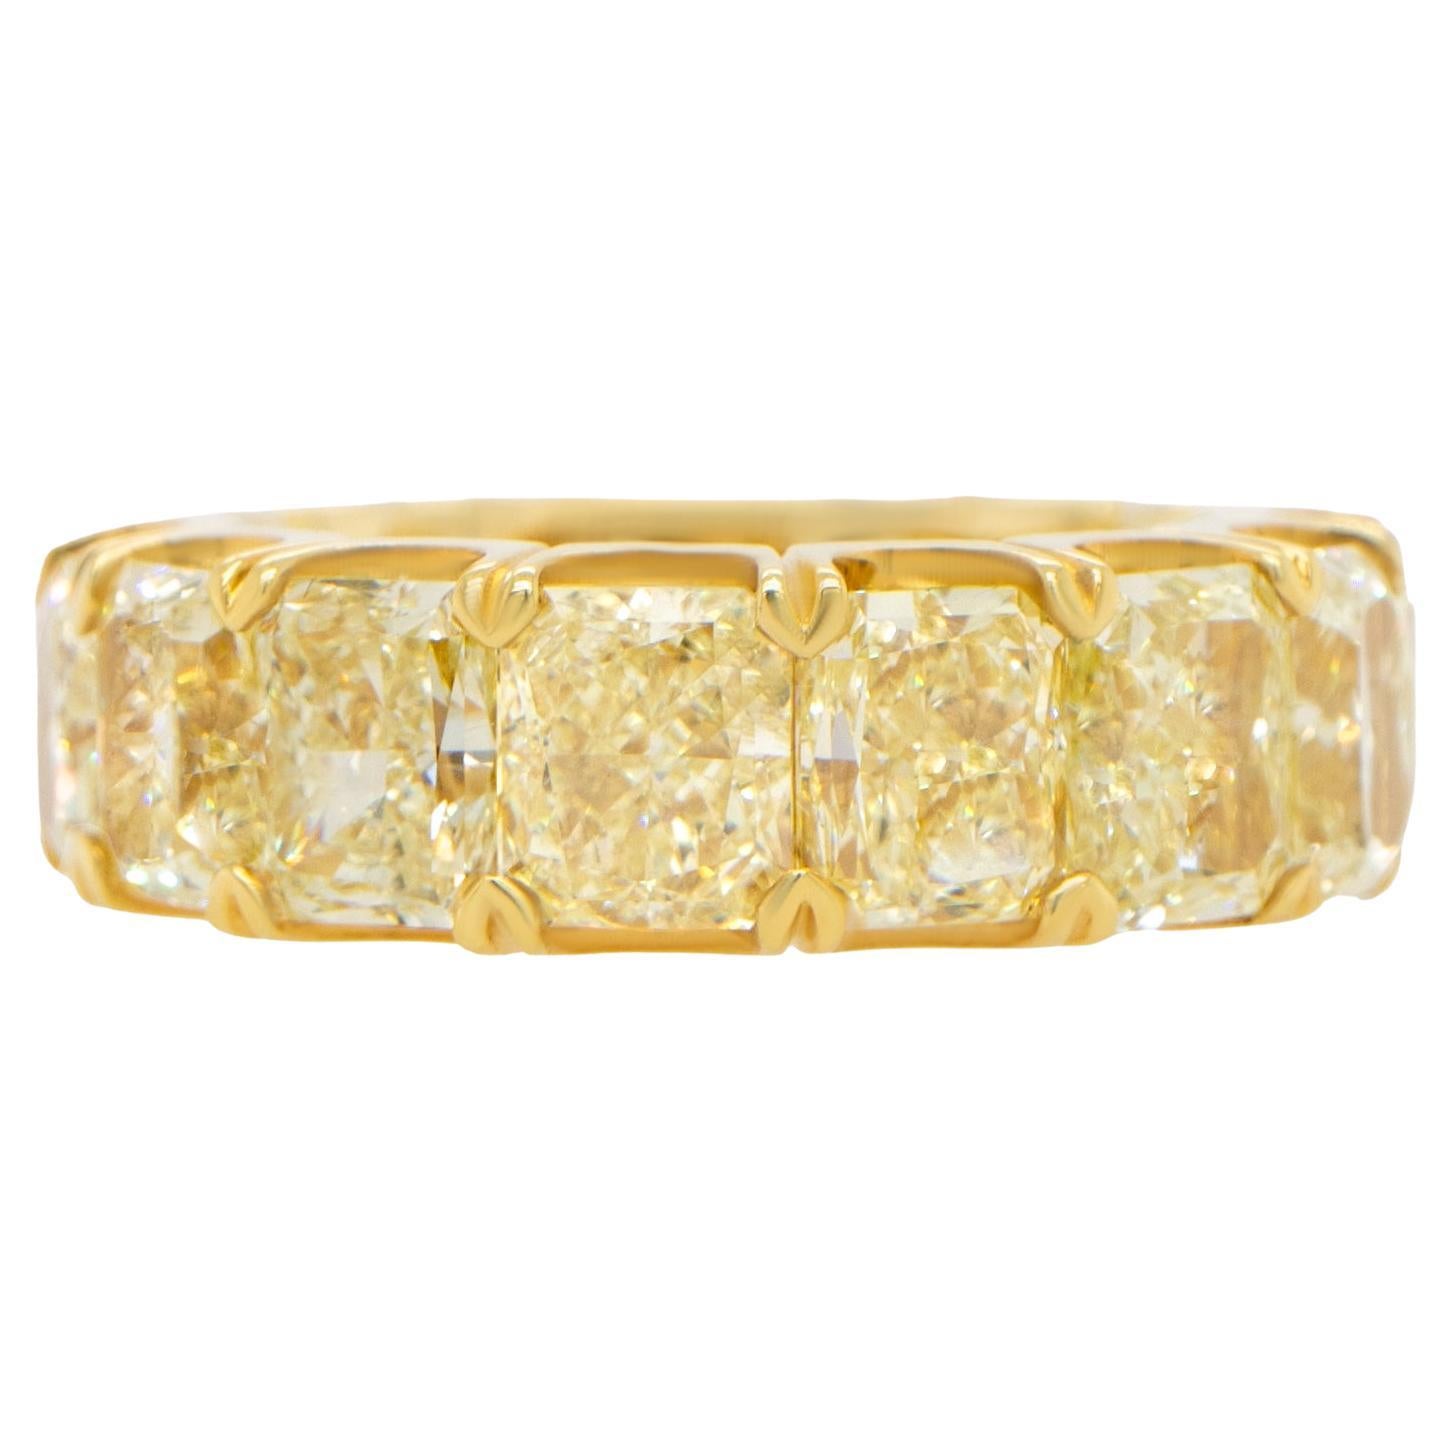 Important GIA Certified Radiant Yellow Diamond Eternity Band 16.20 Carats 18K